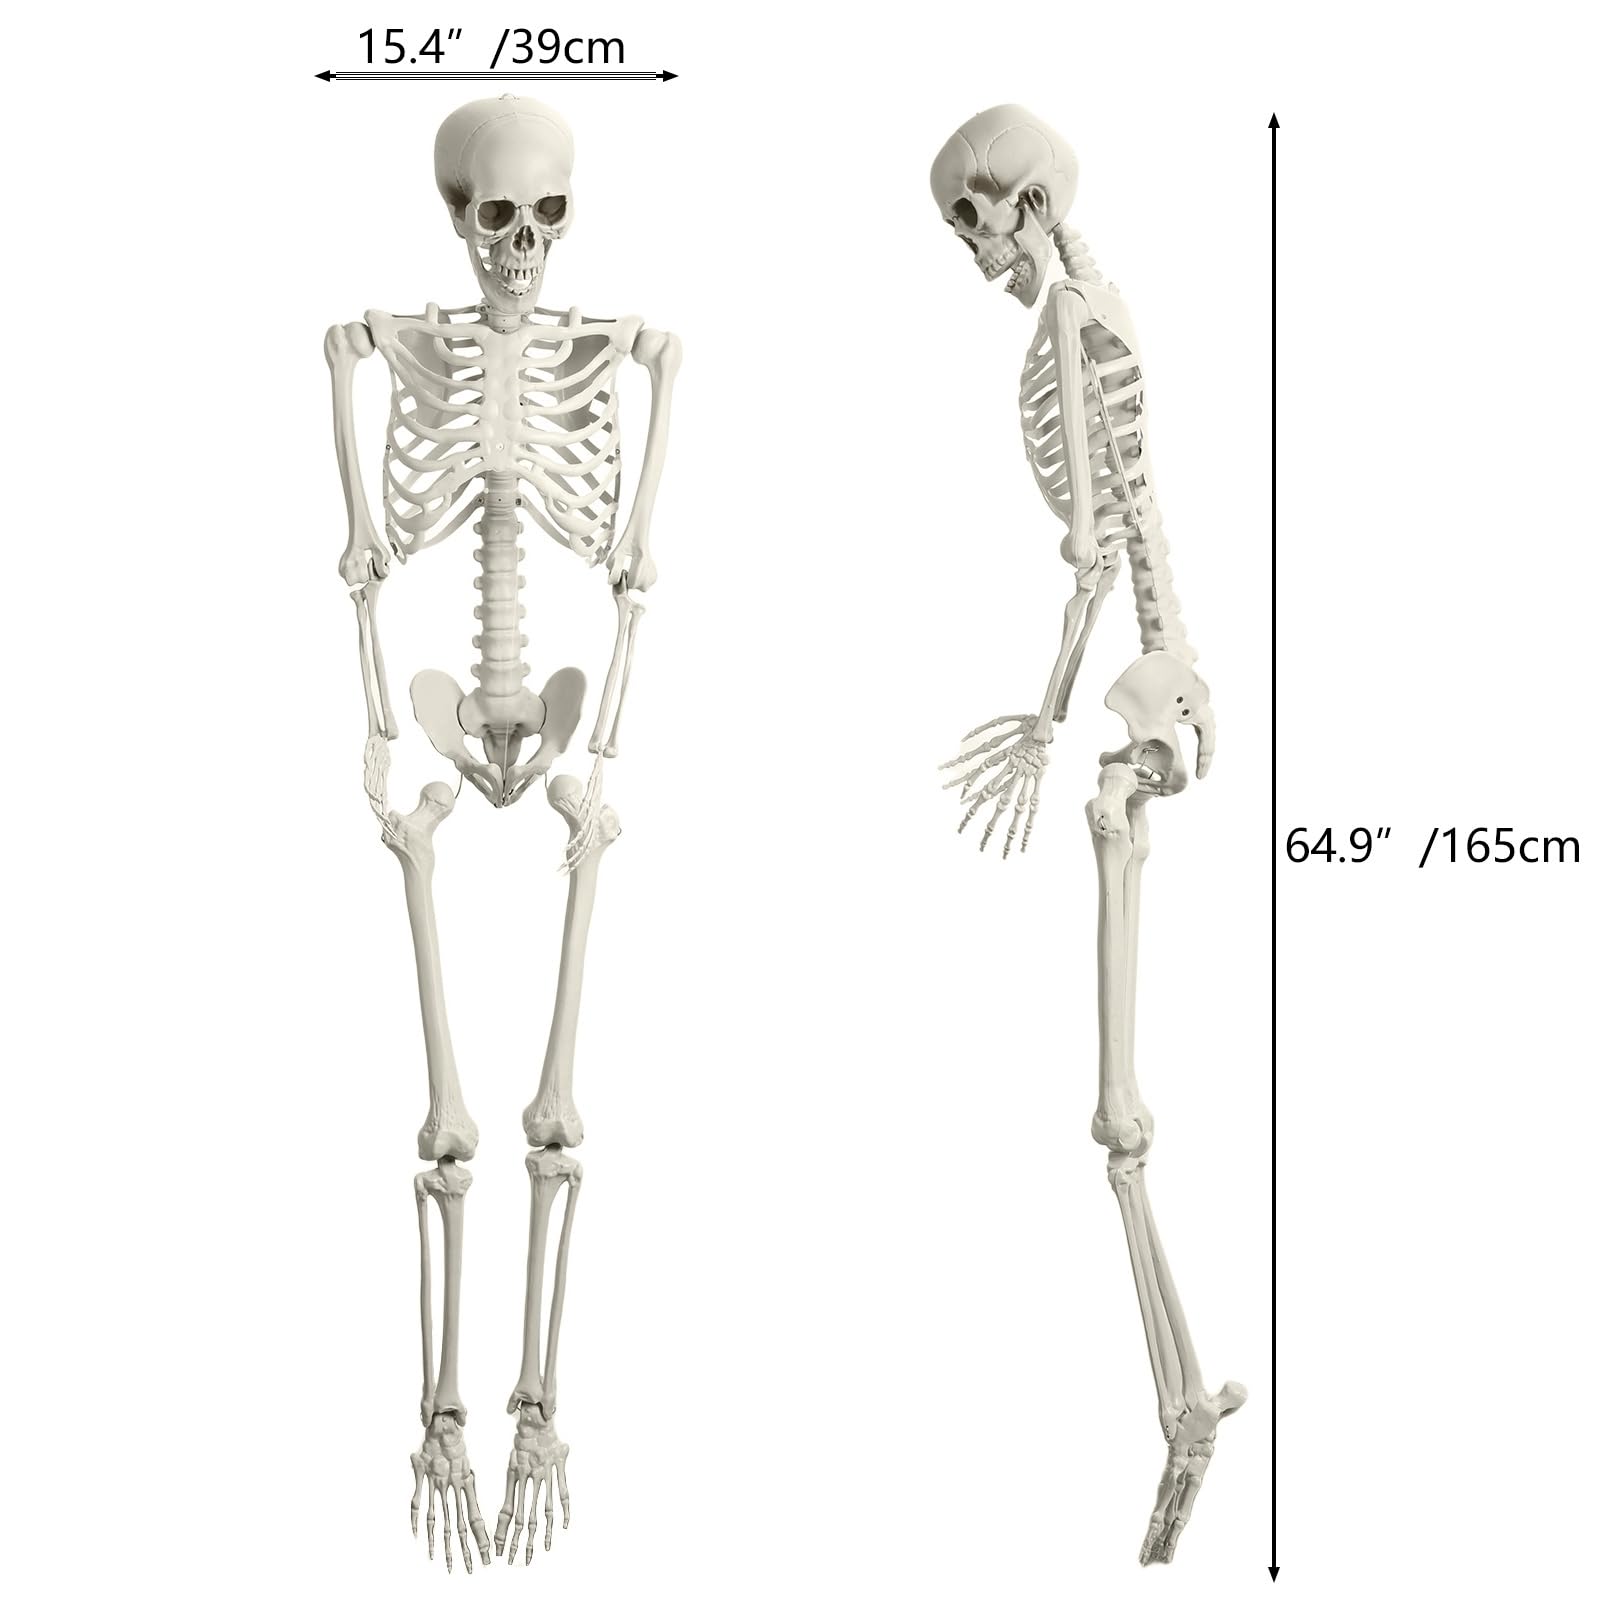 Halloween Life Size Skeleton, 5.4Ft Skeleton Decor Human Full Body Bones Realistic Pose Skeleton Prop with Movable Joints Posable Plastic Skeleton for Indoor Outdoor Party Favors Lawn Décor 170cm